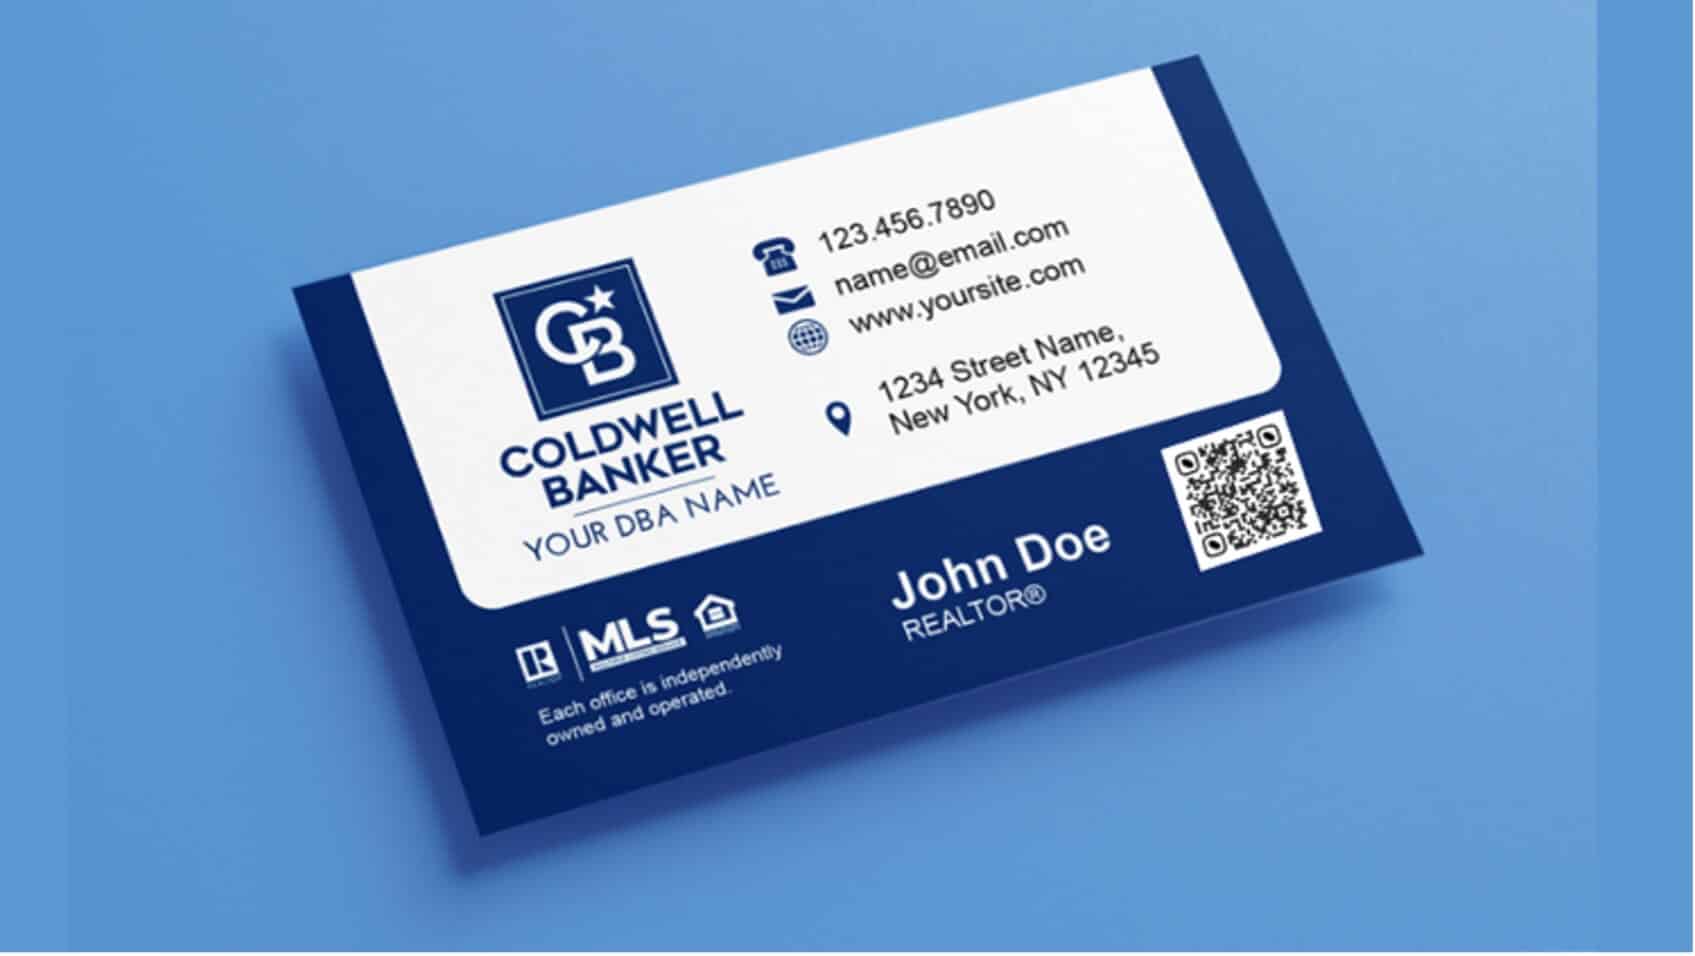 An example of a realtor's business card that features a QR code in the bottom right corner.